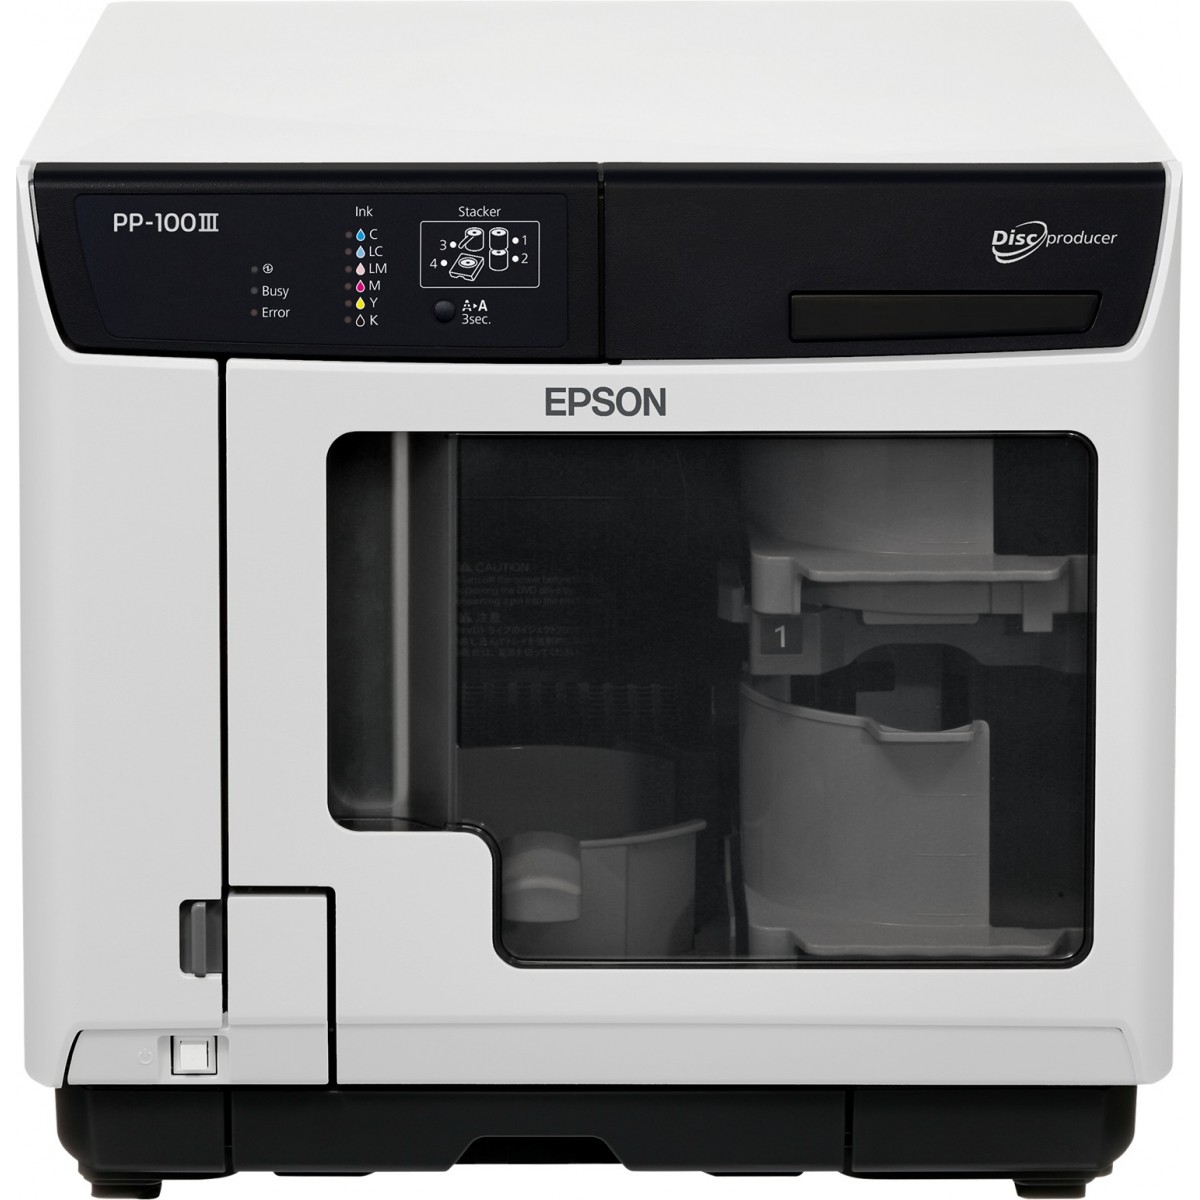 Epson Discproducer™ PP-100III - 377 x 493 x 348 mm - 24 kg - 620 mm - 720 mm - 528 mm - 30.14 g